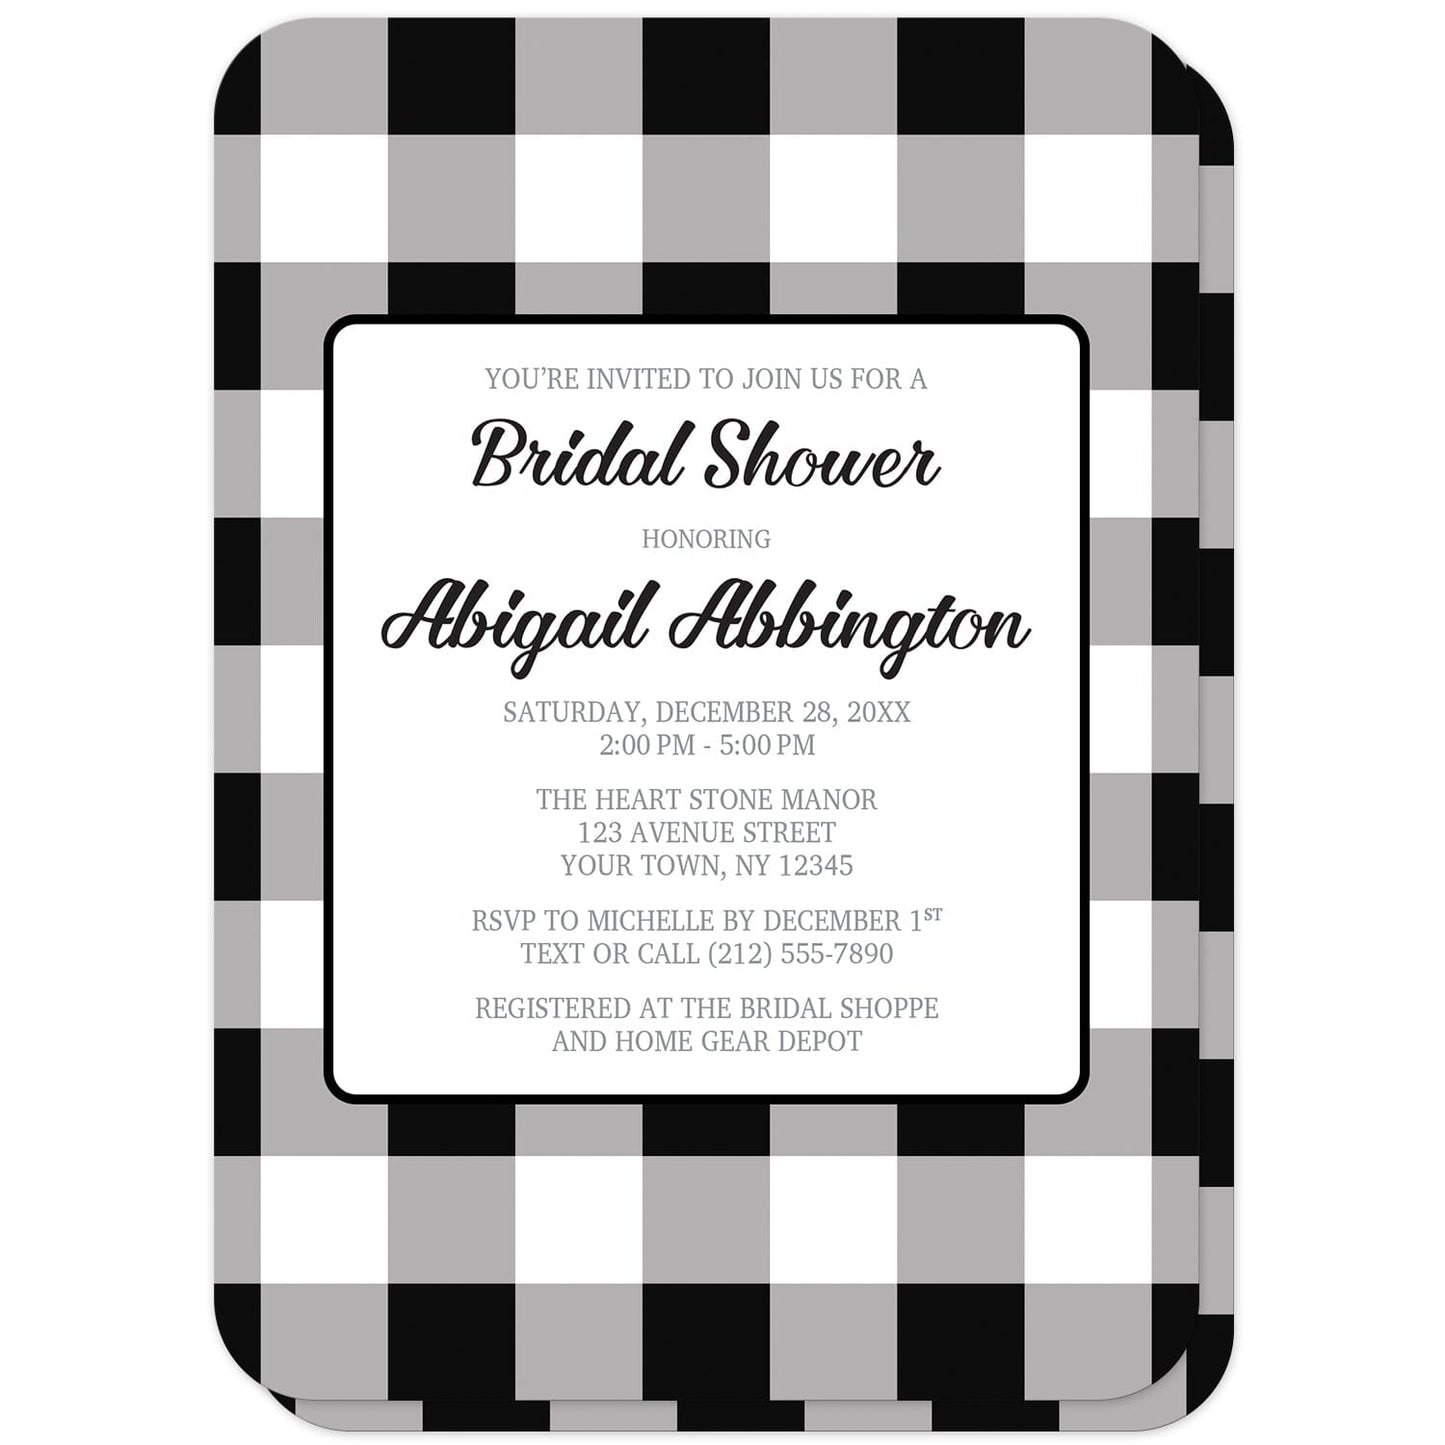 Black and White Buffalo Plaid Bridal Shower Invitations (with rounded corners) at Artistically Invited. Black and white buffalo plaid bridal shower invitations with a large black and white buffalo plaid (buffalo check) pattern background. Your personalized buffalo plaid bridal shower invitation details are custom printed in black and gray inside a white rectangular area in the middle over the buffalo plaid background design. 